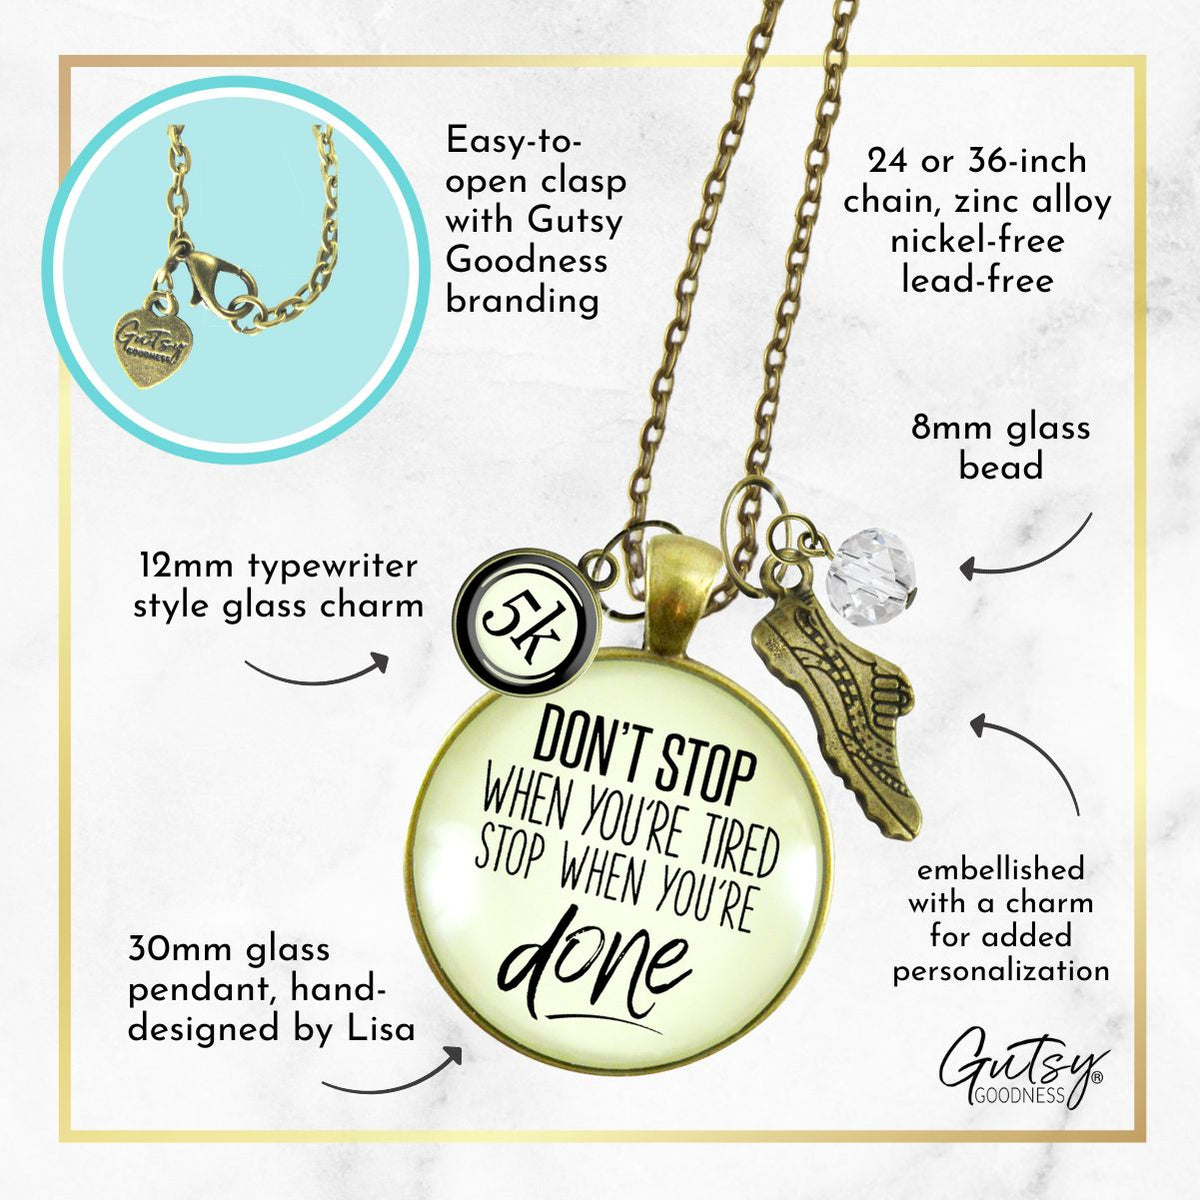 5K Marathon Necklace Don't Stop When You're Tired Motivational Run Sport Charm  Necklace - Gutsy Goodness Handmade Jewelry